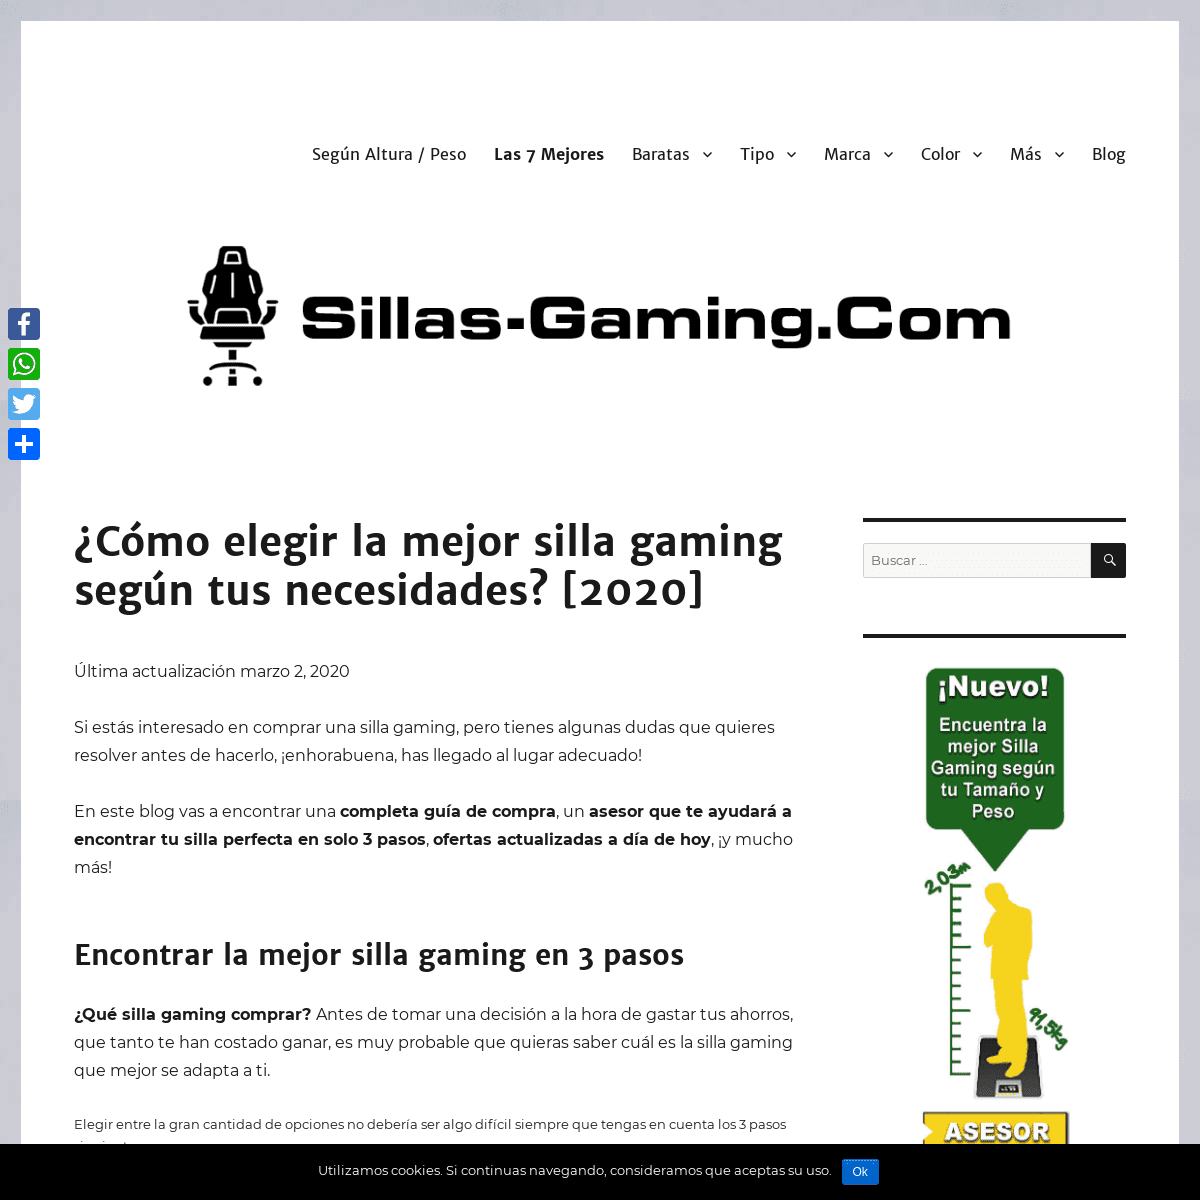 A complete backup of sillas-gaming.com